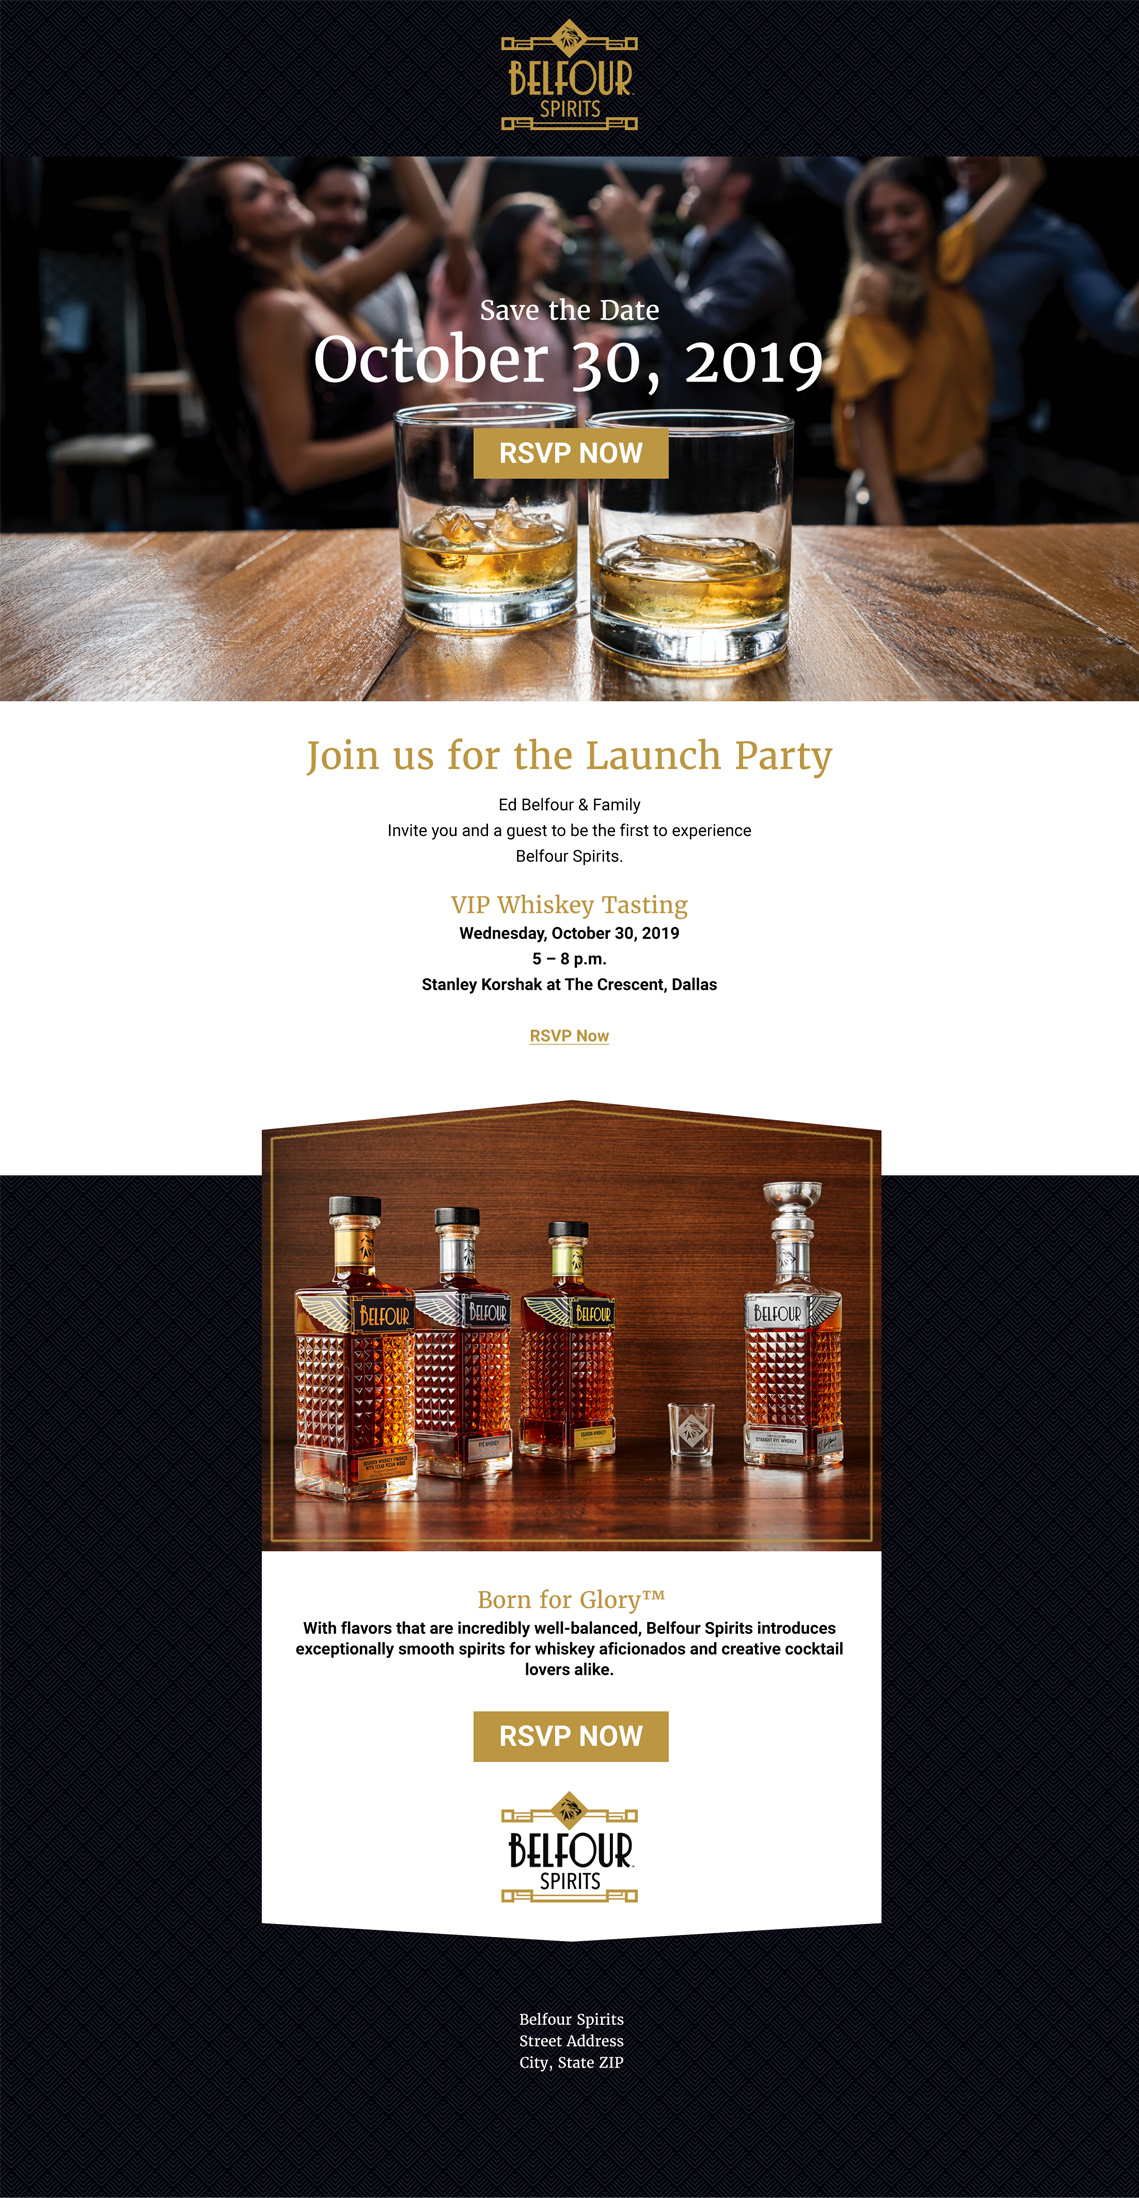 Email invitation featuring images of people dancing and enjoying whiskey along with product shots